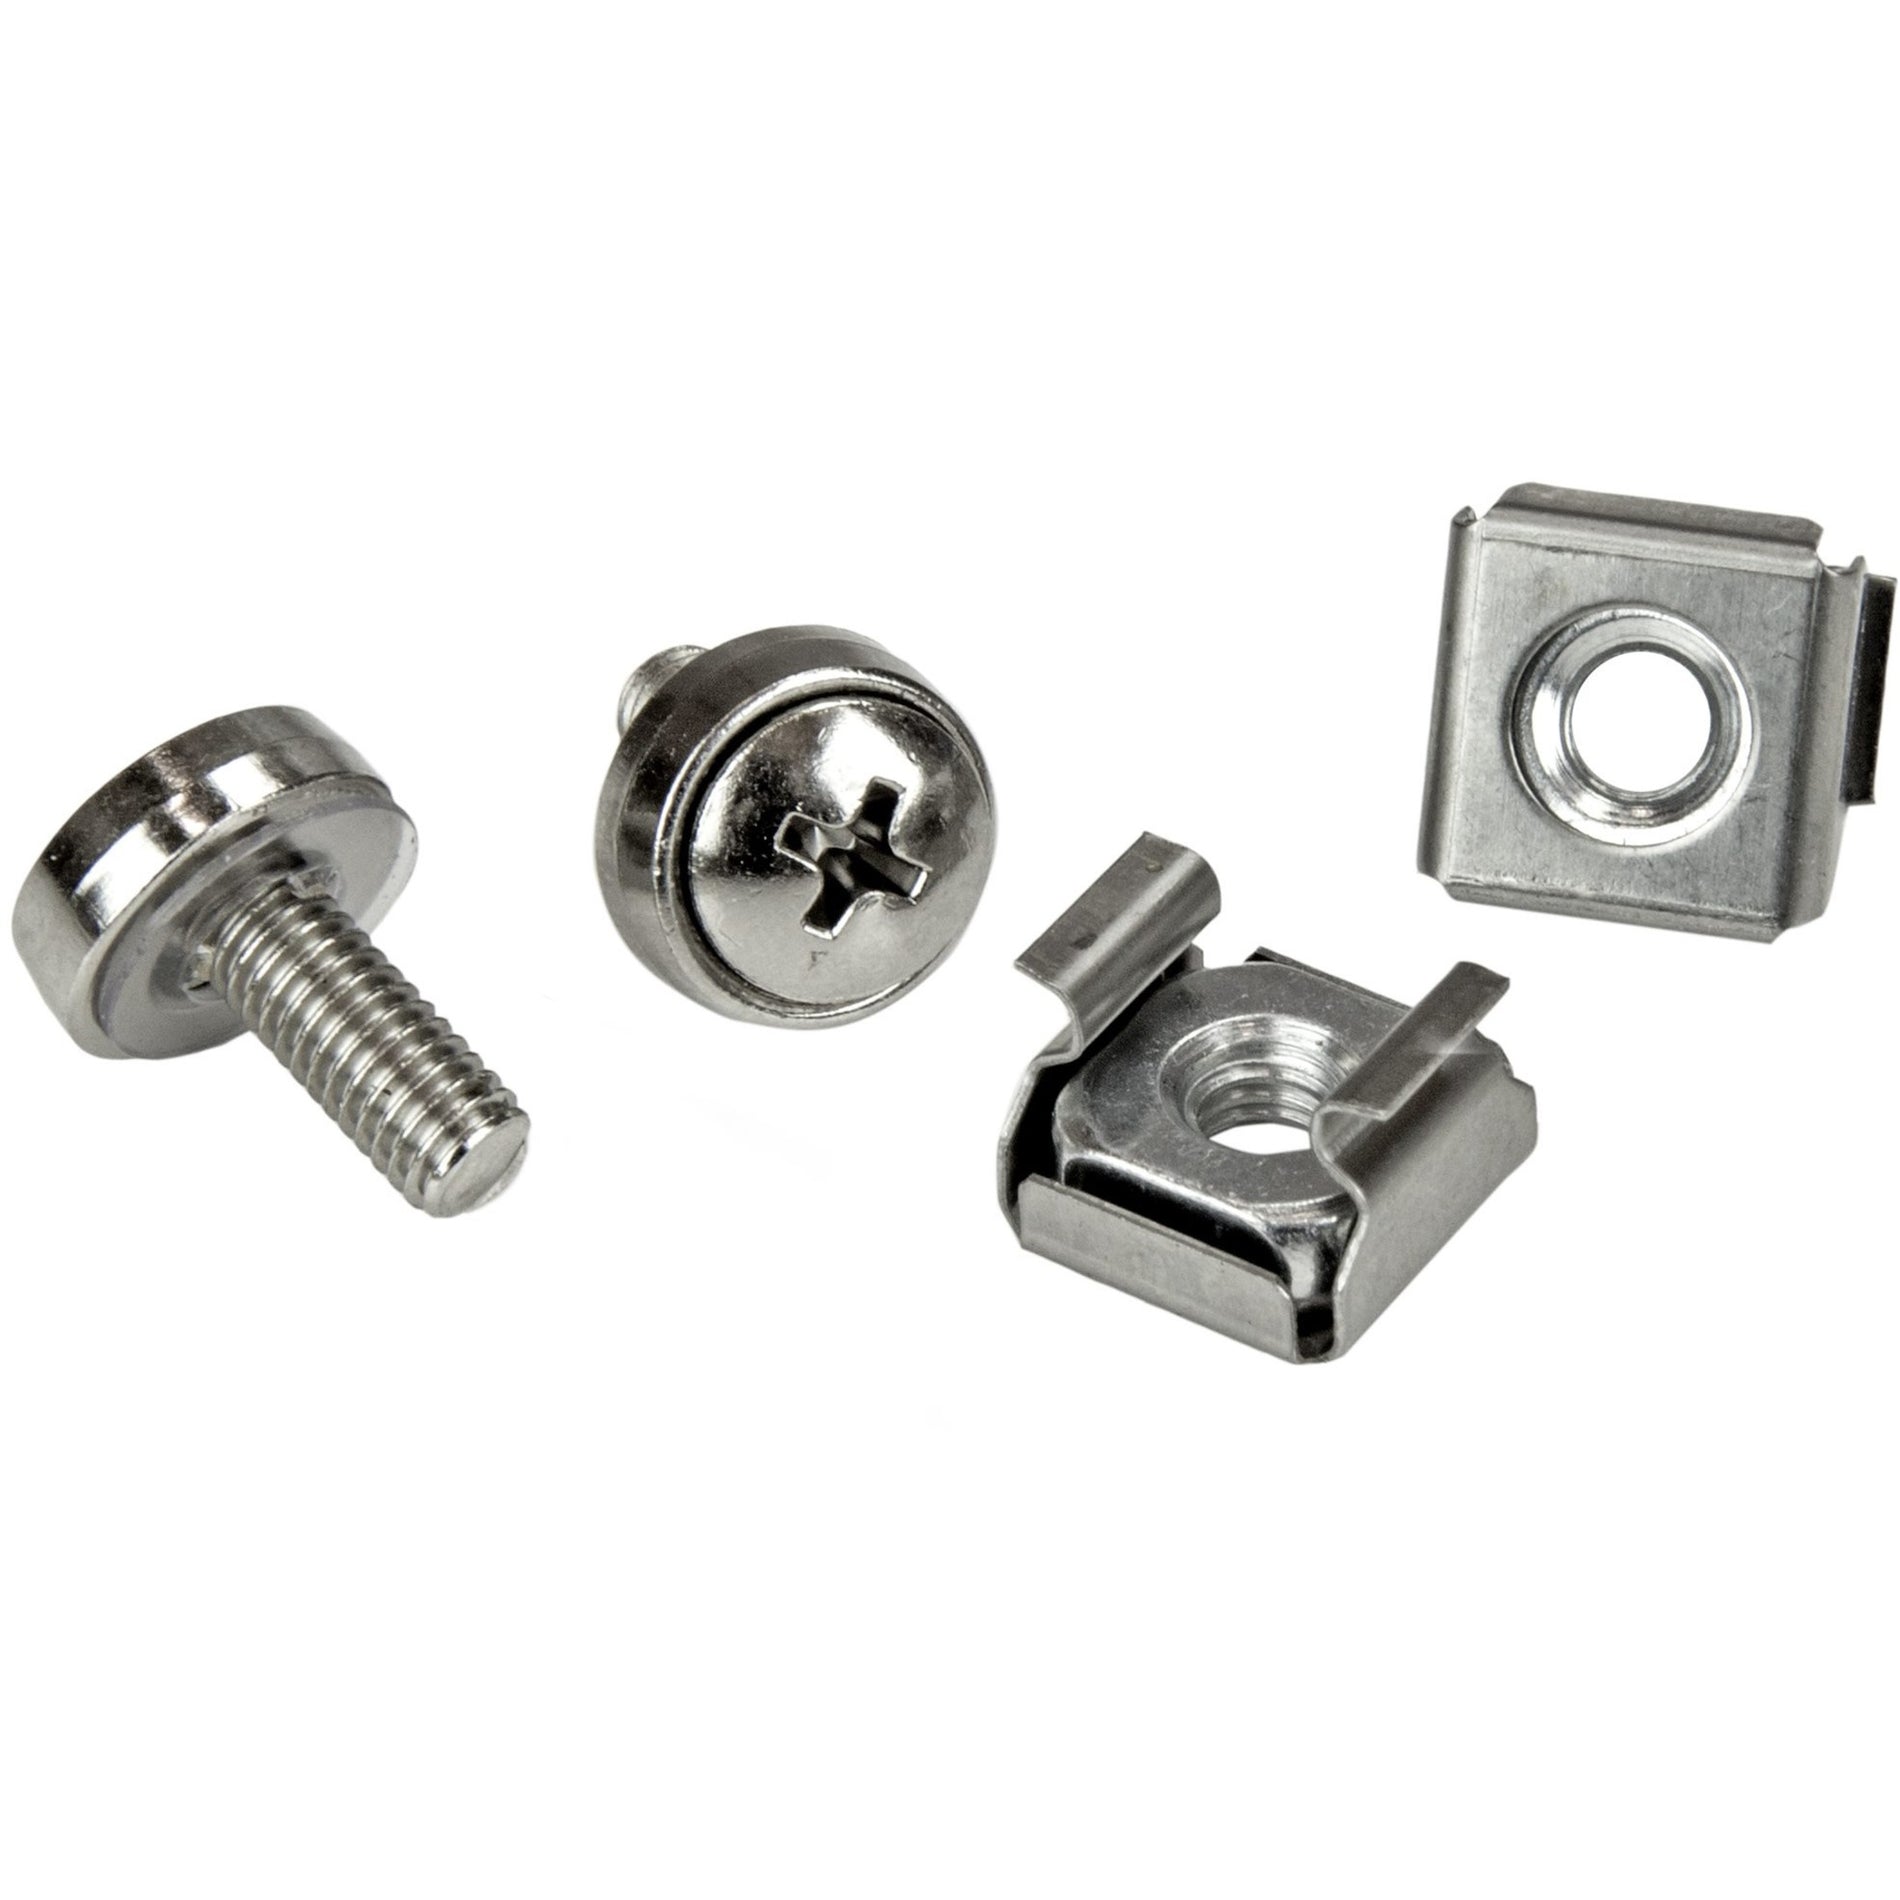 StarTech.com CABSCREWM52 100 Pkg M5 Mounting Screws and Cage Nuts for Server Rack Cabinet, Rust Resistant, Nickel Plated